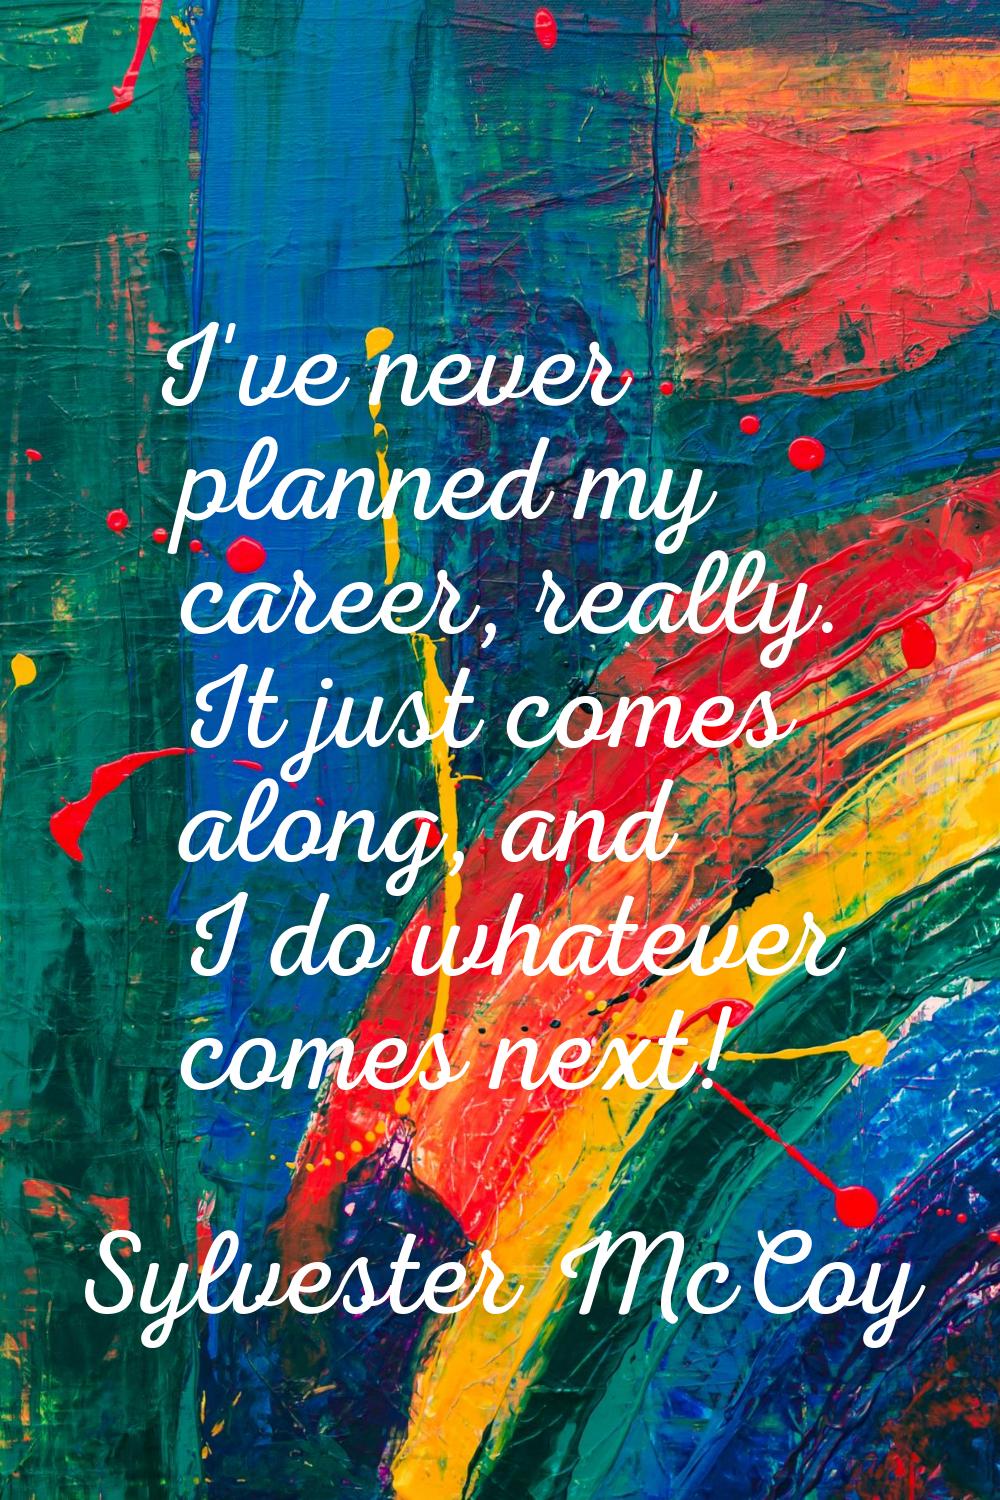 I've never planned my career, really. It just comes along, and I do whatever comes next!